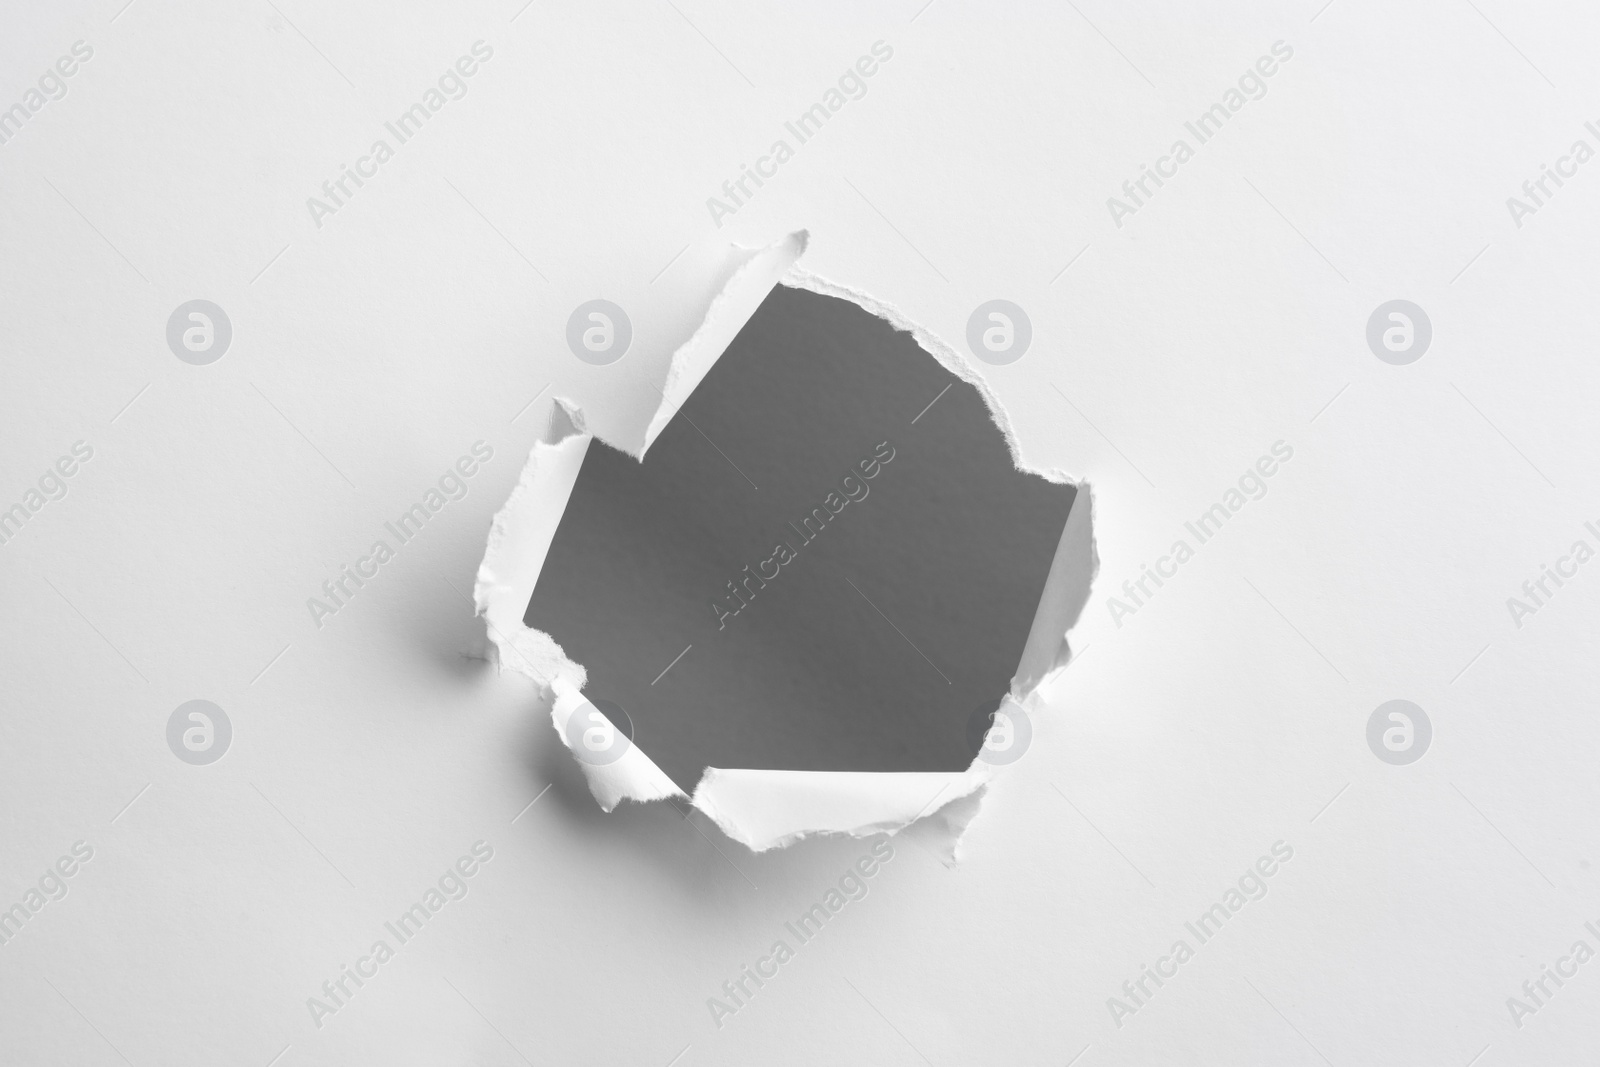 Photo of Hole in white paper on light background